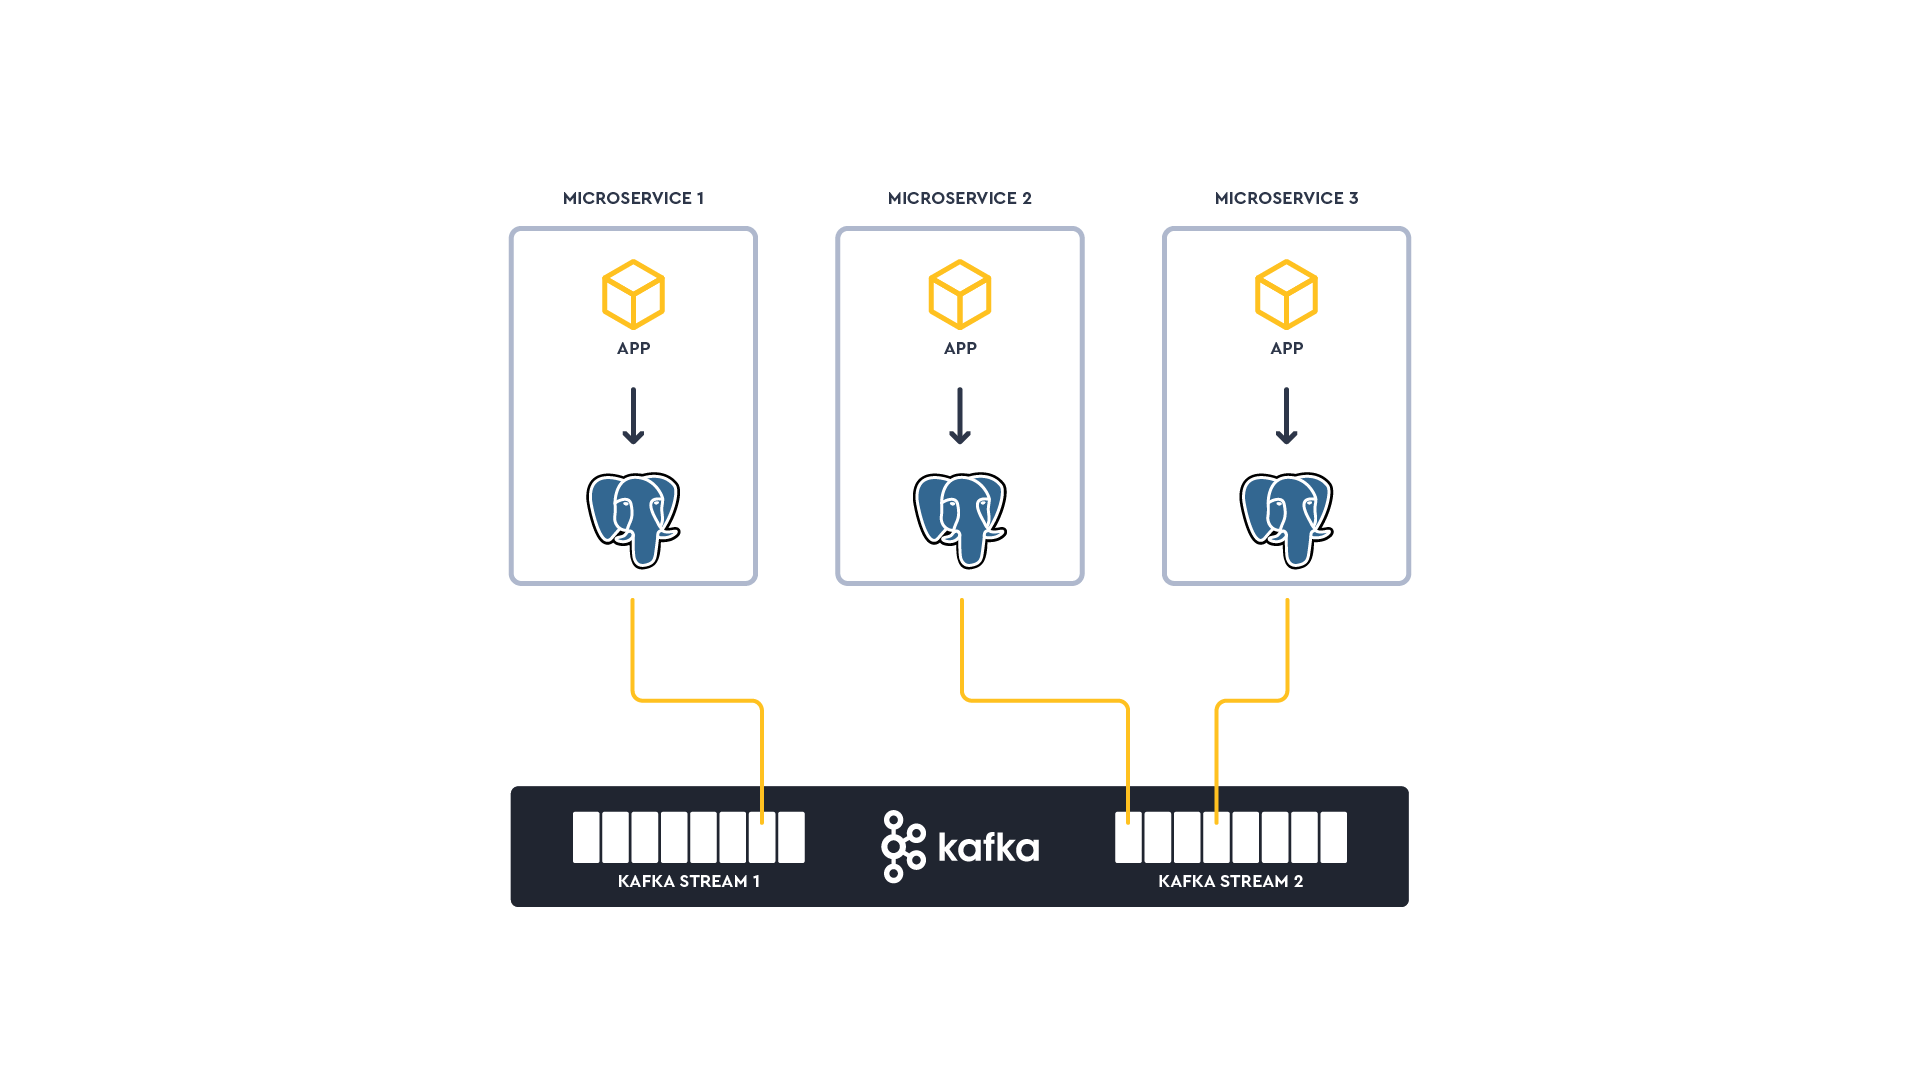 typical microservice architecture with Apache kafka